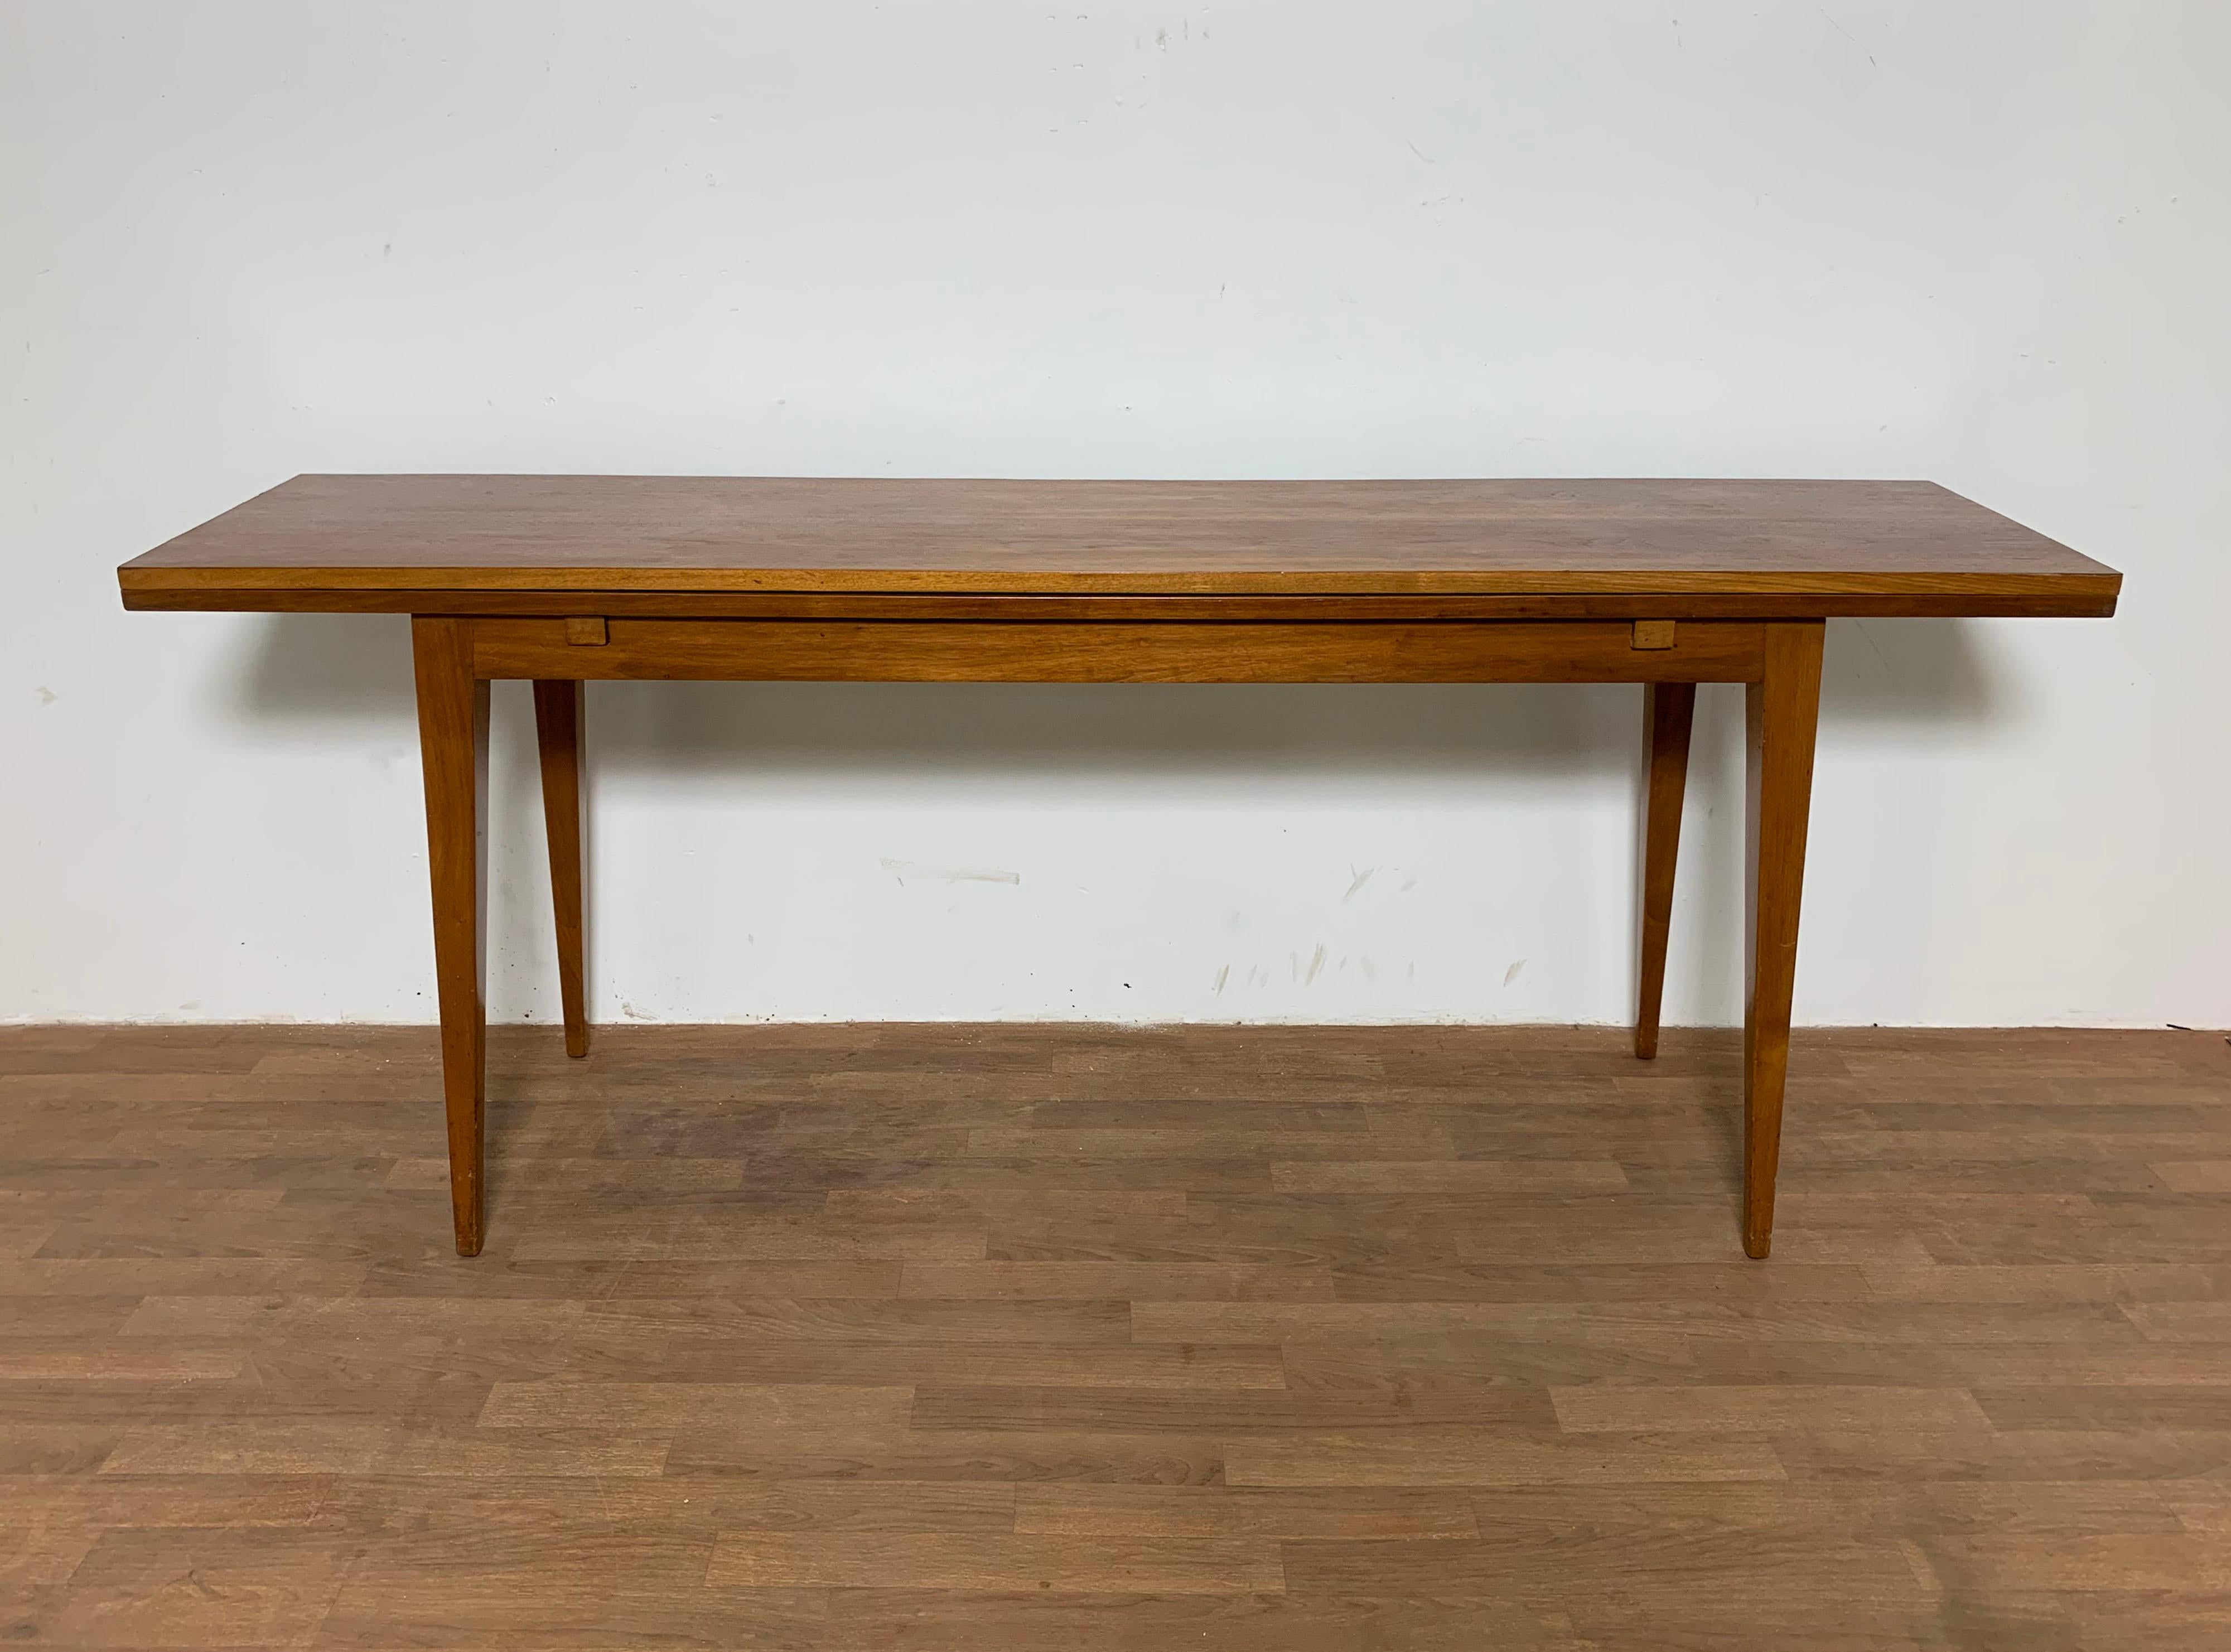 Walnut flip top console table by Edward Wormley for Dunbar, ca. 1950s.
Measures 72